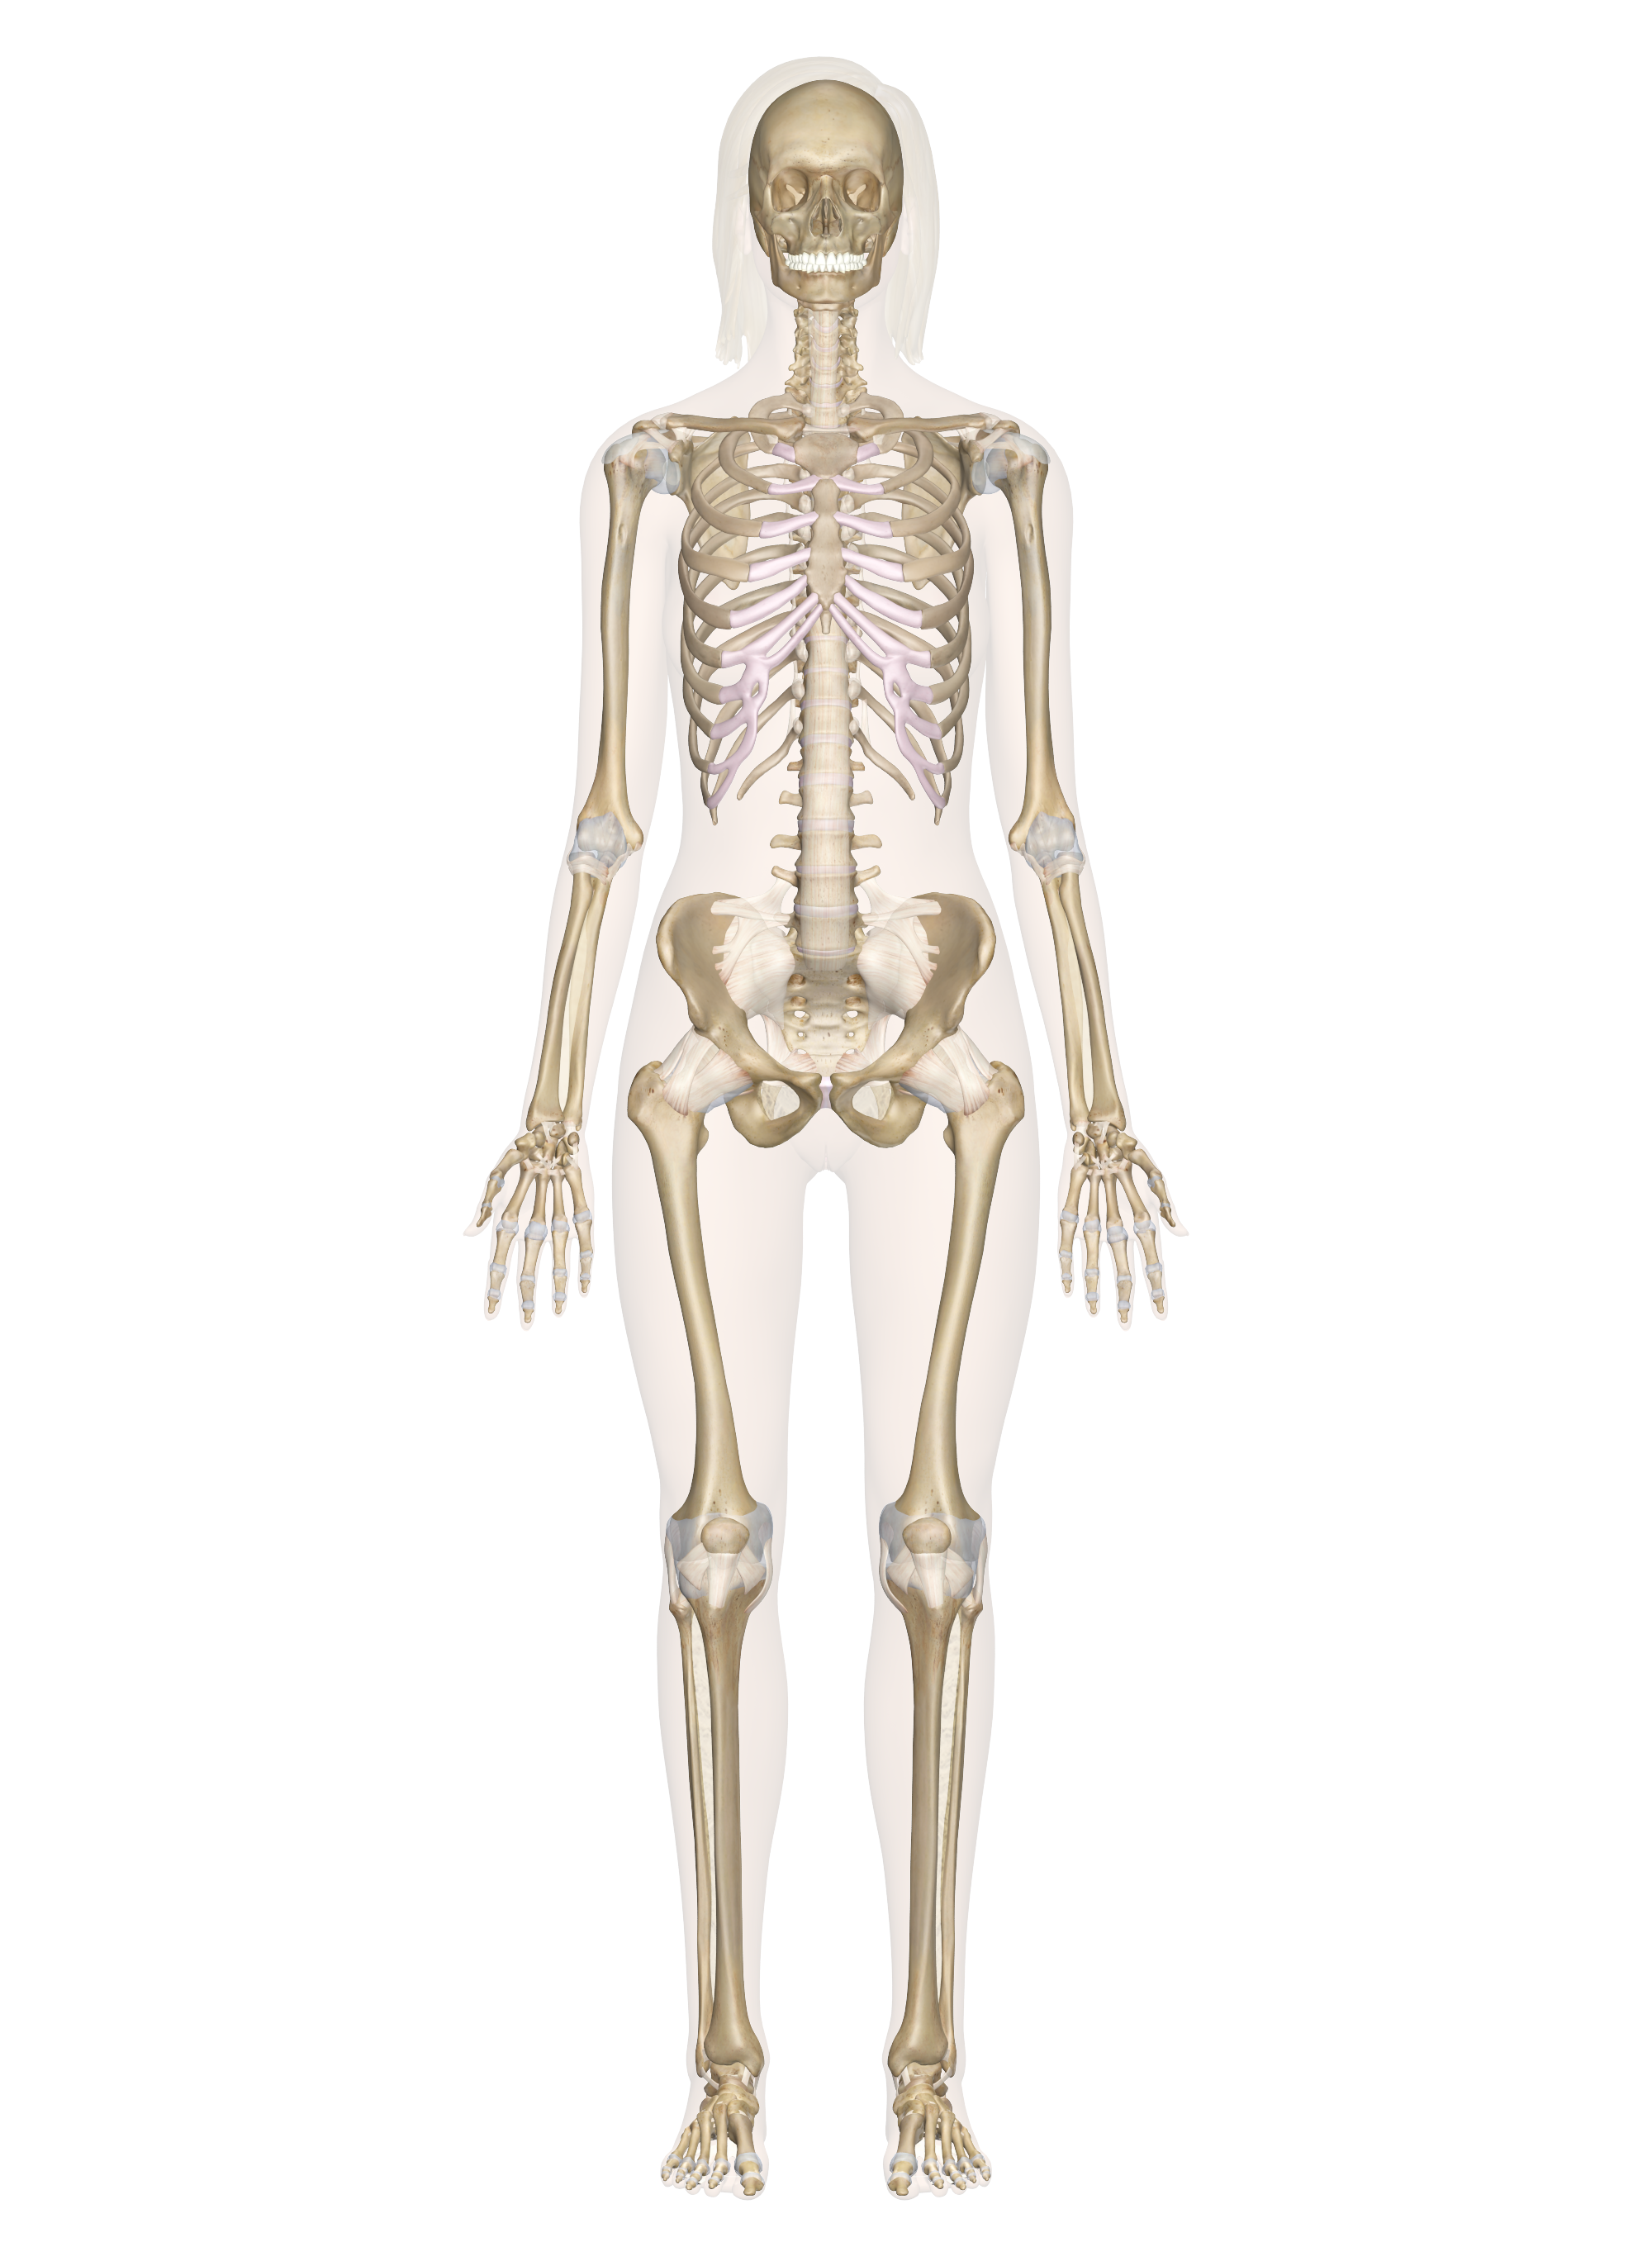 Axial skeleton of Human with detail of parts - Bloggjhedu